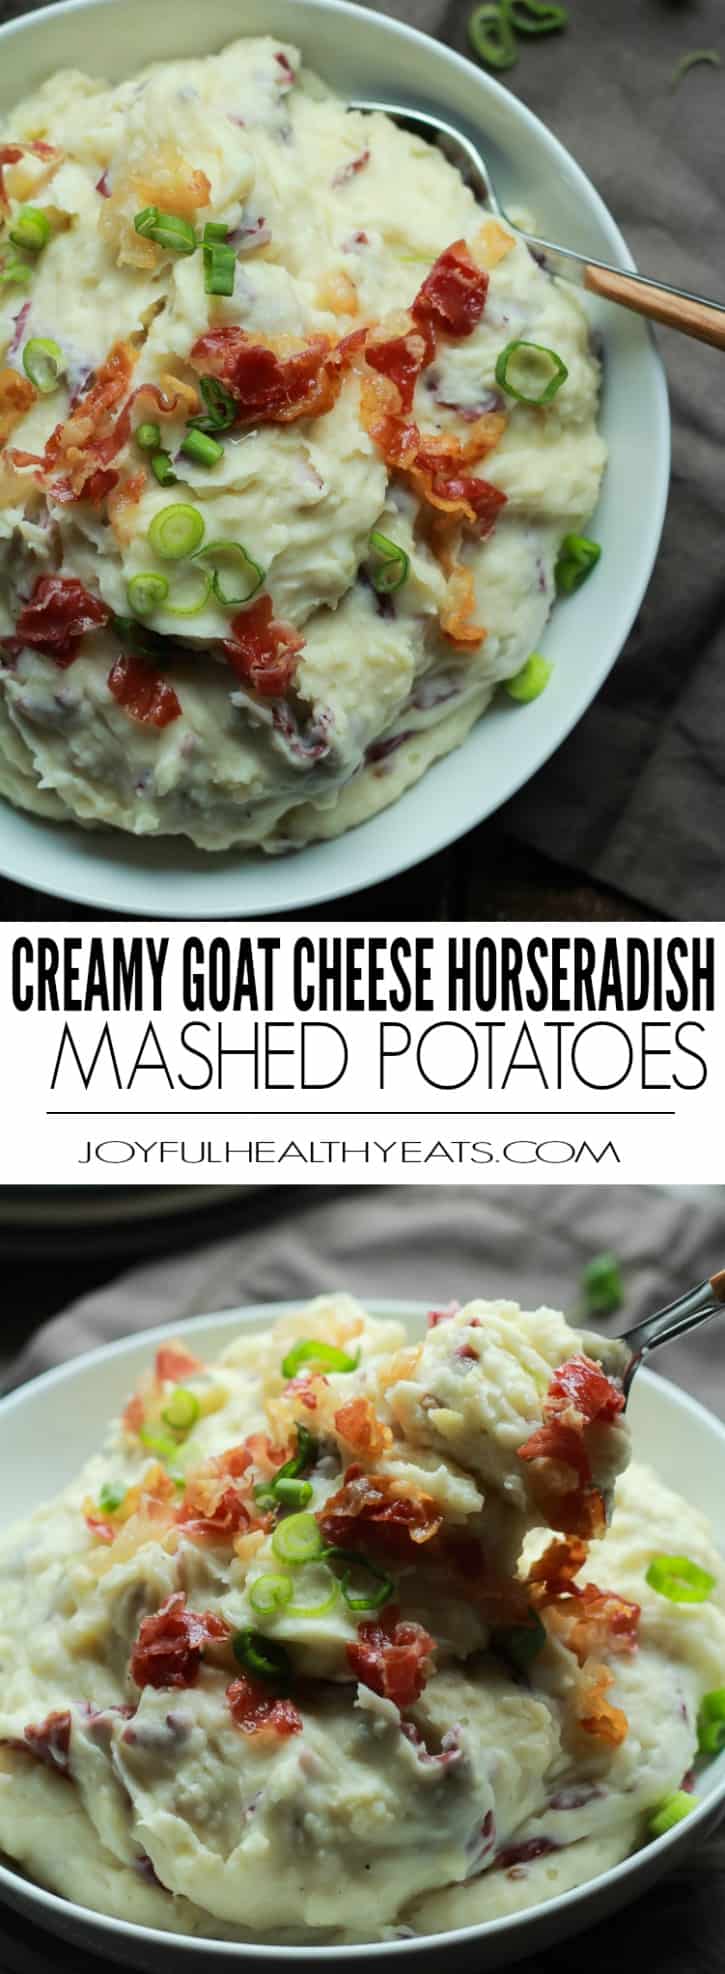 A Collage of Two Images of Homemade Horseradish Mashed Potatoes